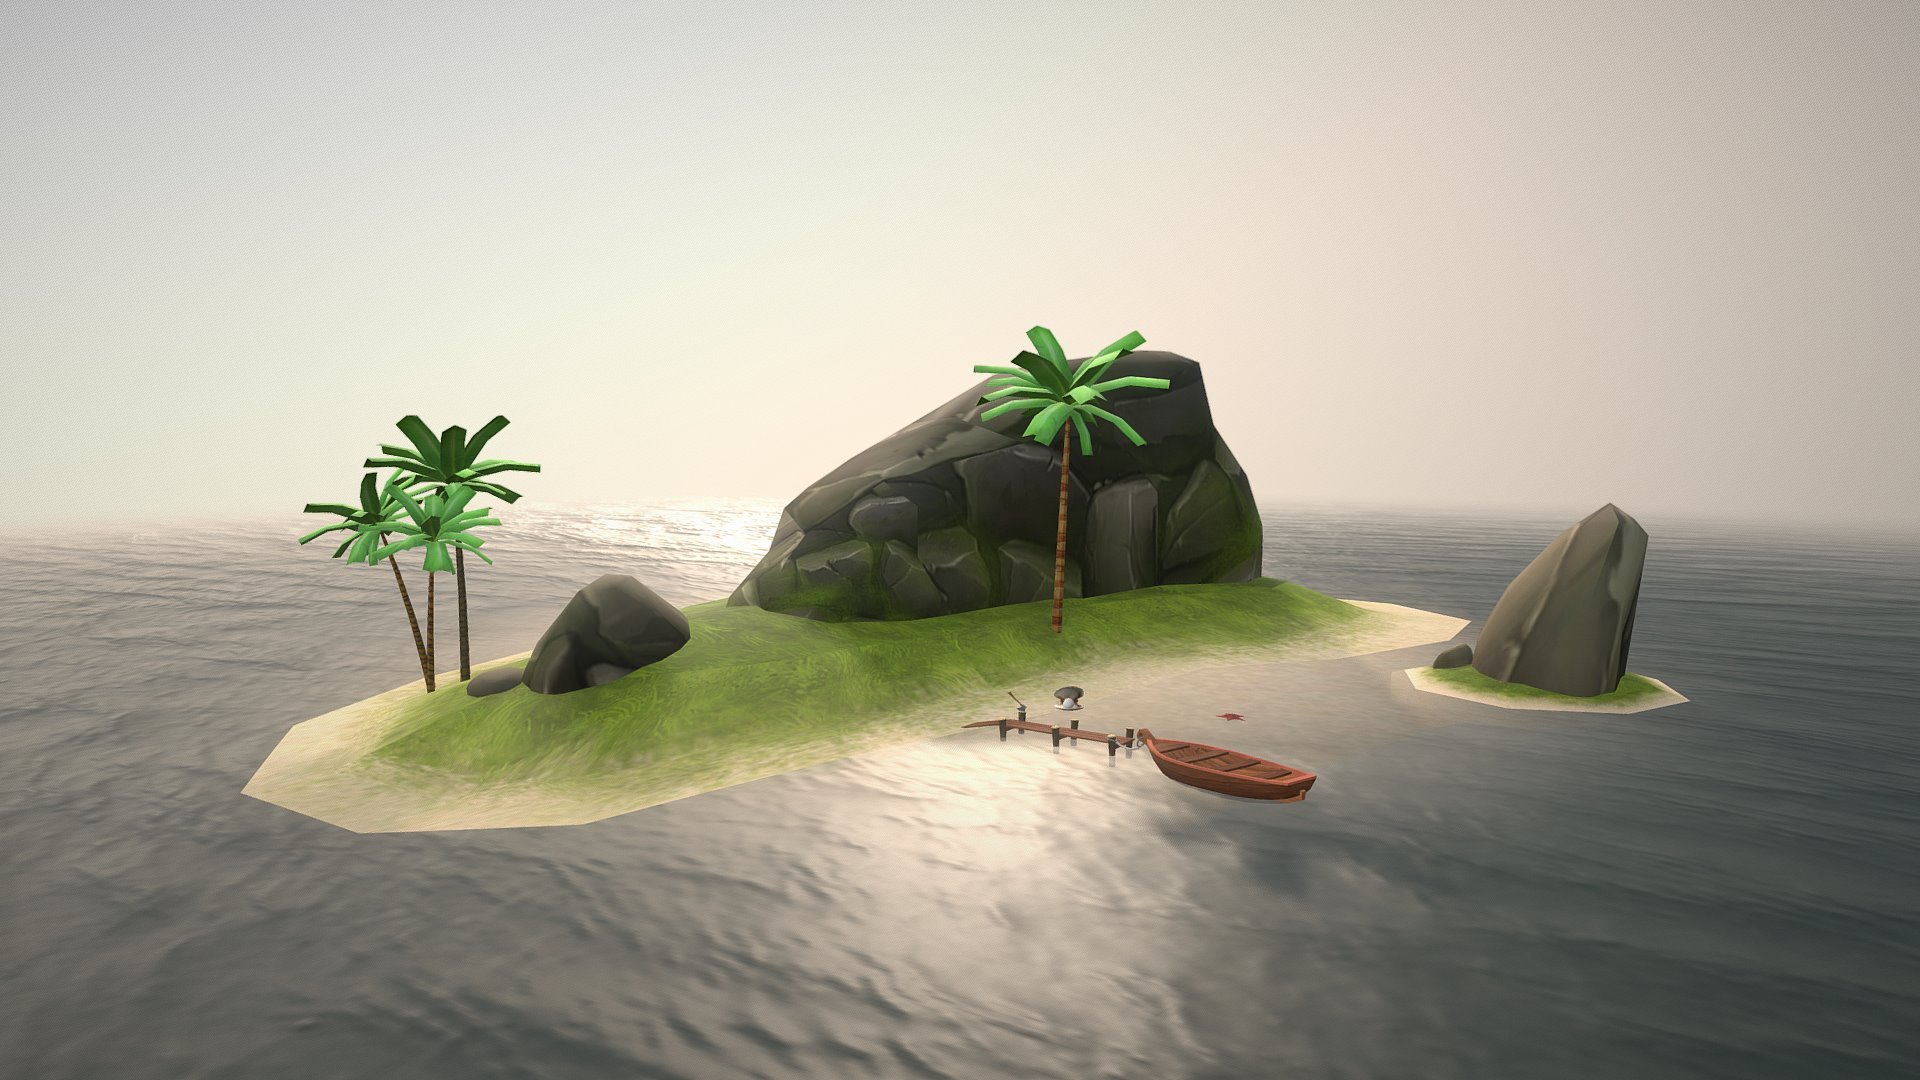 PirateCollection_Island

All Objects - (triangles 5342) / (points 3594)

Low-poly 3D models for game


- Island
- Palms
- Rock
- Dock
- Boat
- Shell
- Starfish
- Water

Textures  diffuse 
    - PirateCollection_Island.png       - 1024x1024
    - PirateCollection_Island_Shell.png - 256x128
    - PirateCollection_Island_StarFish.png  - 256x256
    - Water_Albedo.tga          - 2048x2048
    - Water_NormalMap.png           - 2048x2048     

If you have questions about my models or need any kind of help, feel free to contact me and i'll do my best to help you 3d model